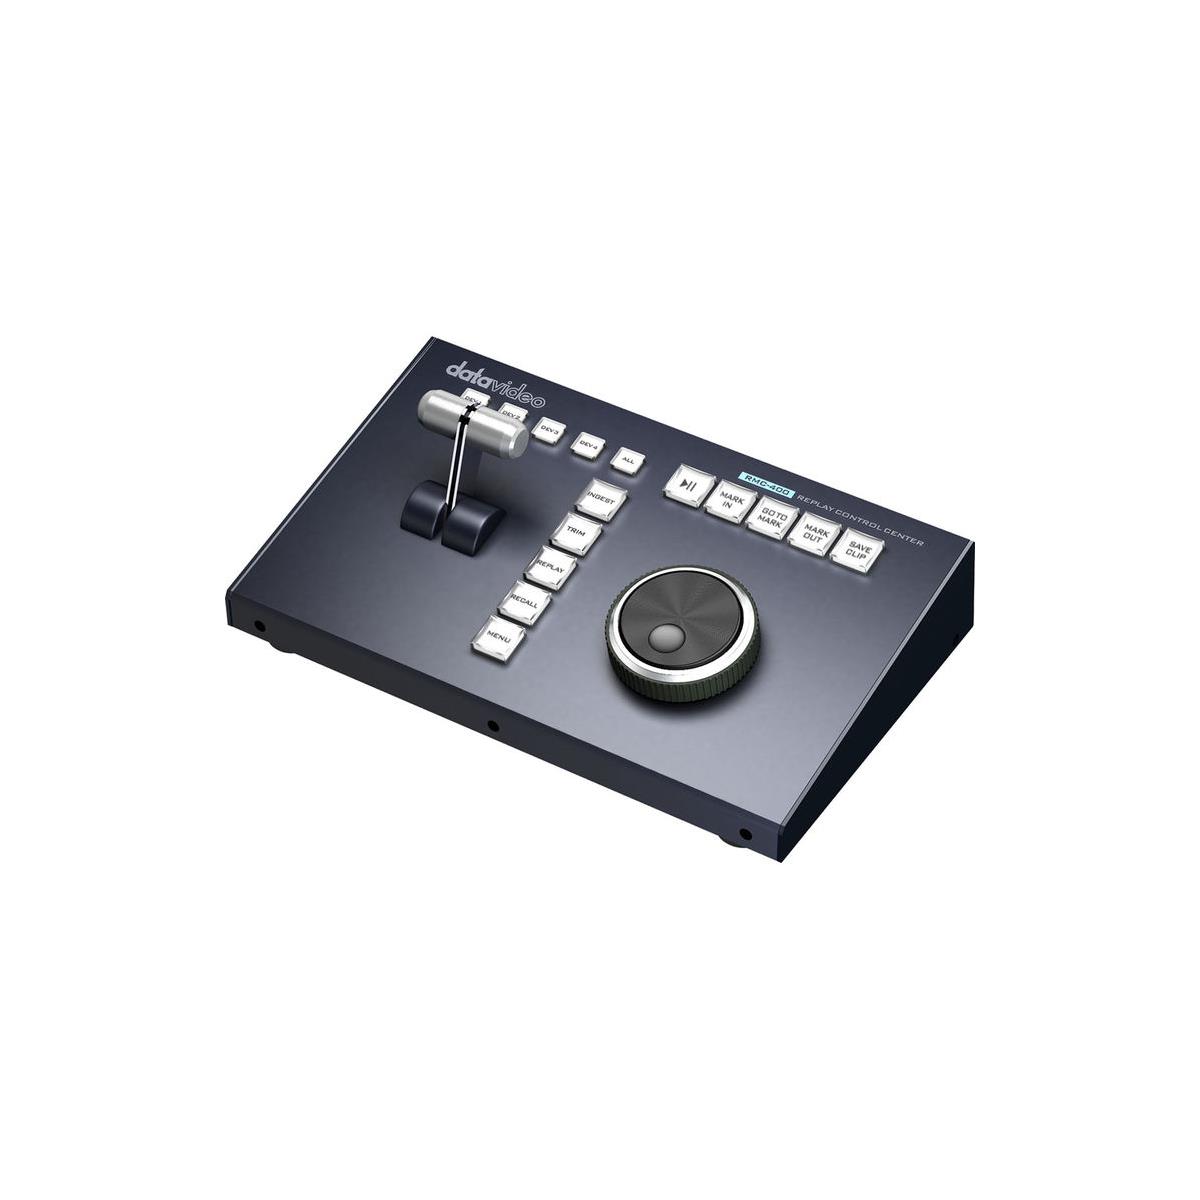 Image of Datavideo RMC-400 Control Unit for HDR-10 Highlight Replay Recorder